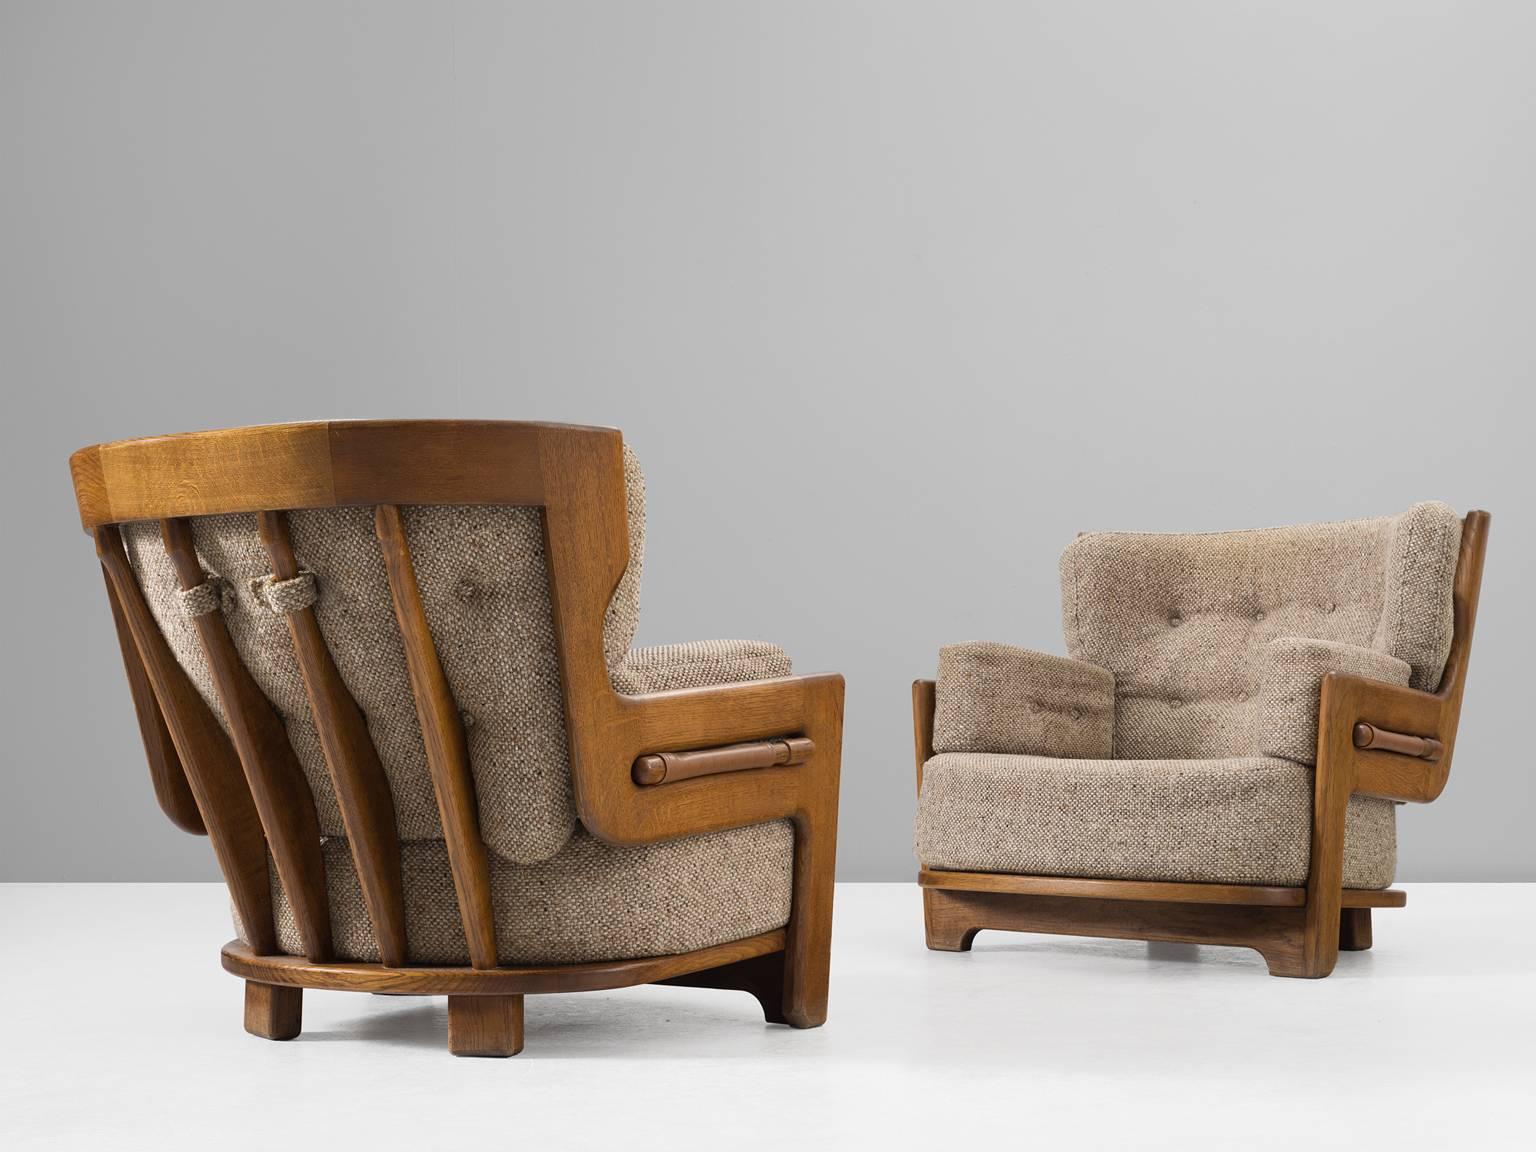 Guillerme et Chambron, set of two lounge chairs, in oak and fabric, France, 1960s. 

Set of two extraordinary Guillerme and Chambron armchairs, in solid oak with the typical characteristic decorative details at the back and capricious forms of the